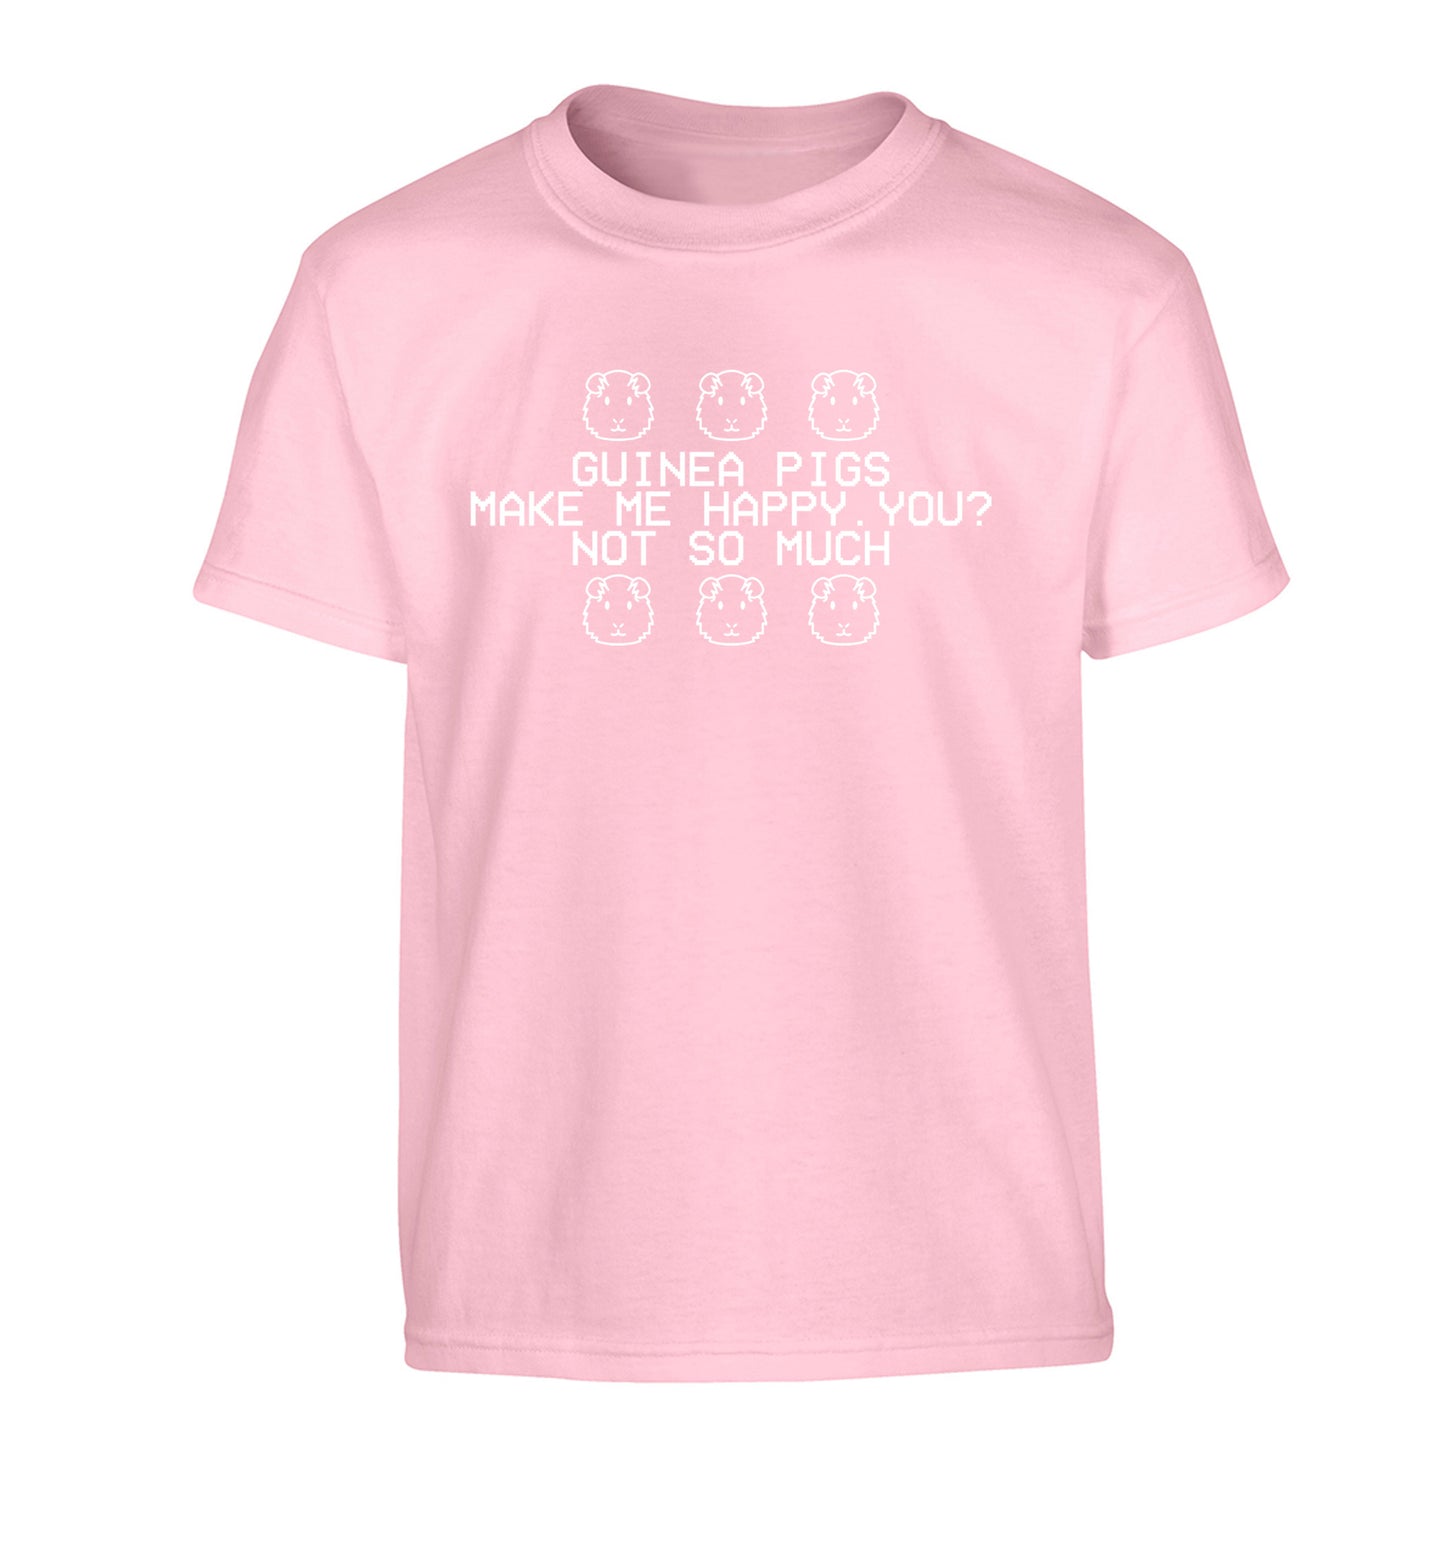 Guinea pigs make me happy, you not so much Children's light pink Tshirt 12-14 Years